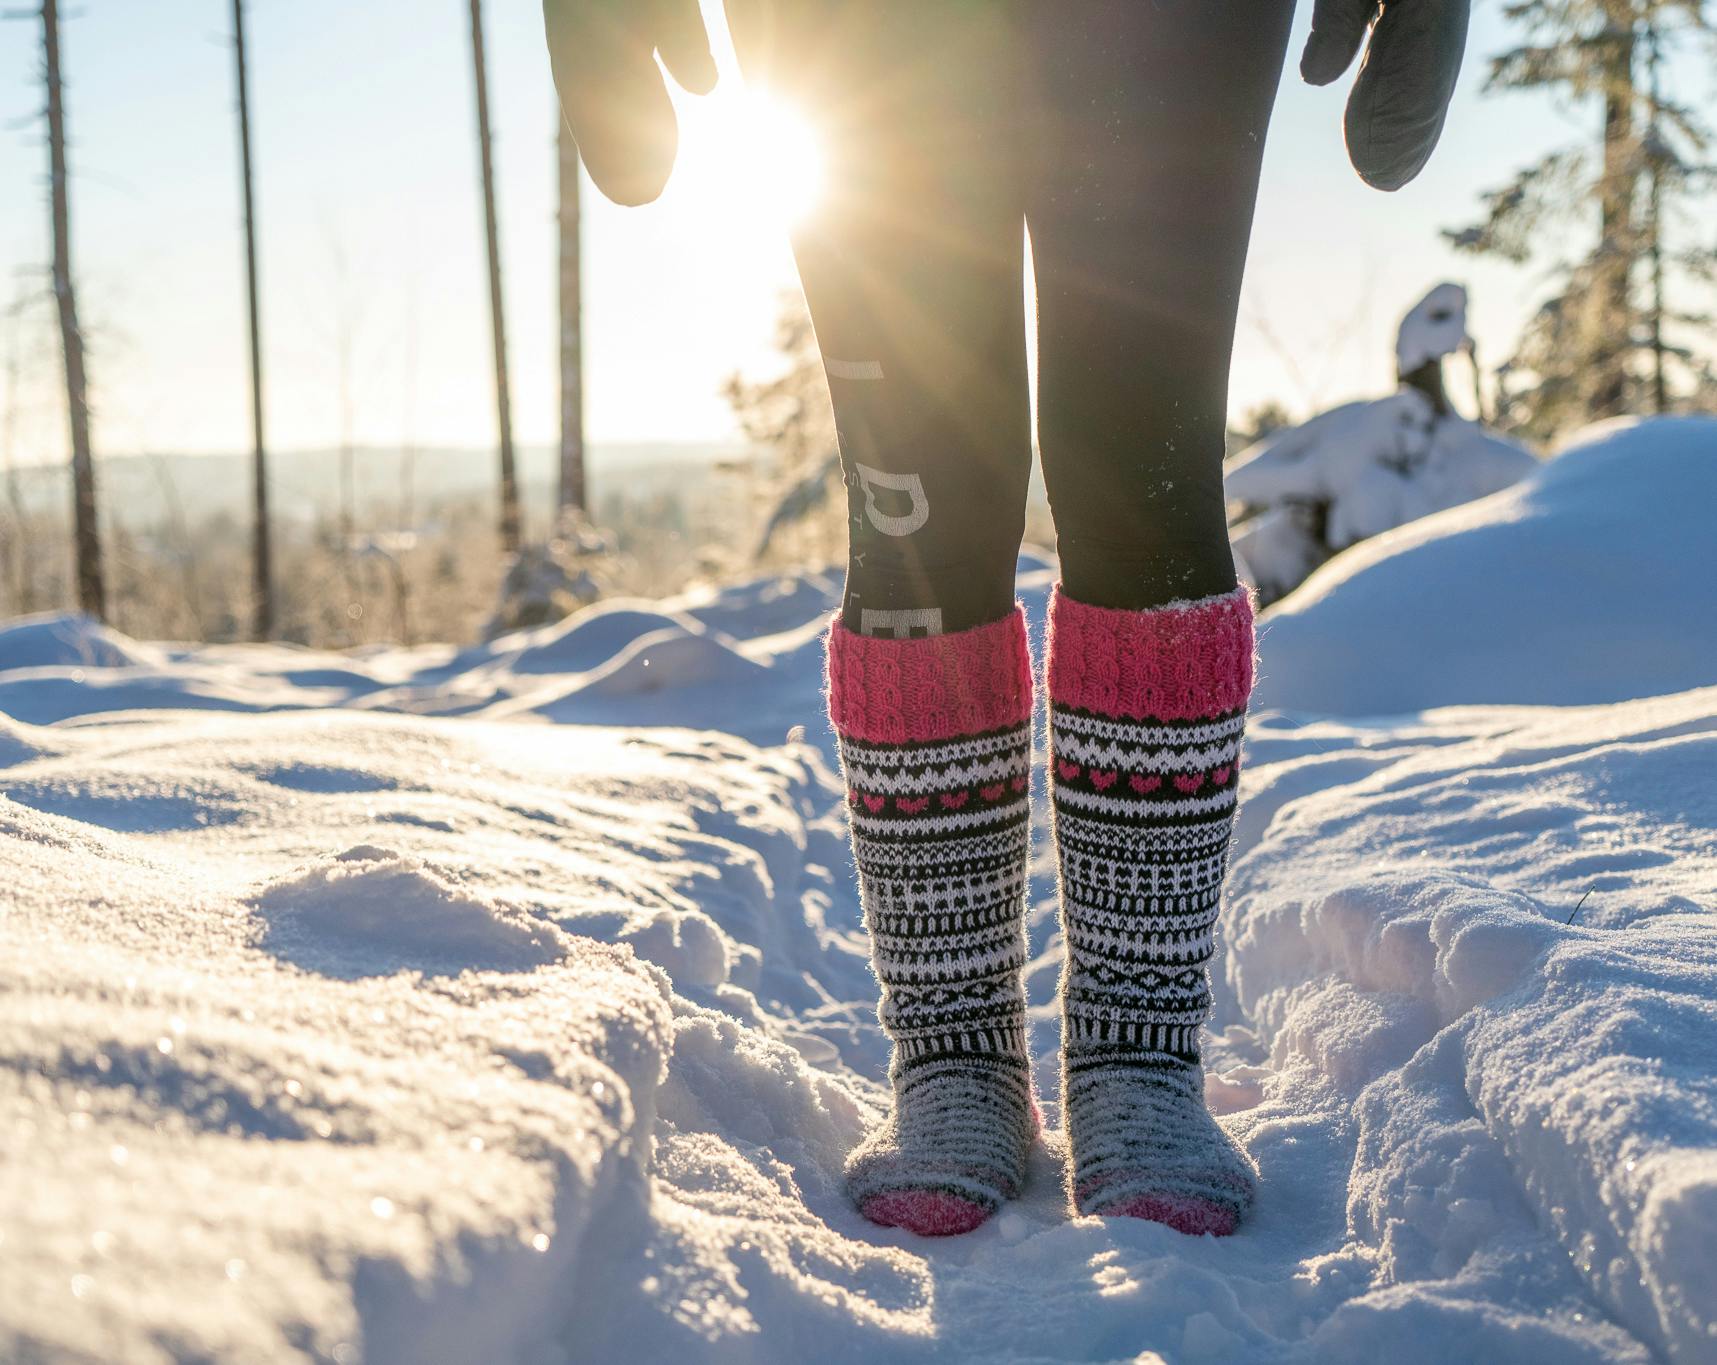 Why should Minnesotans run in wool socks and no shoes? Ask the Finns